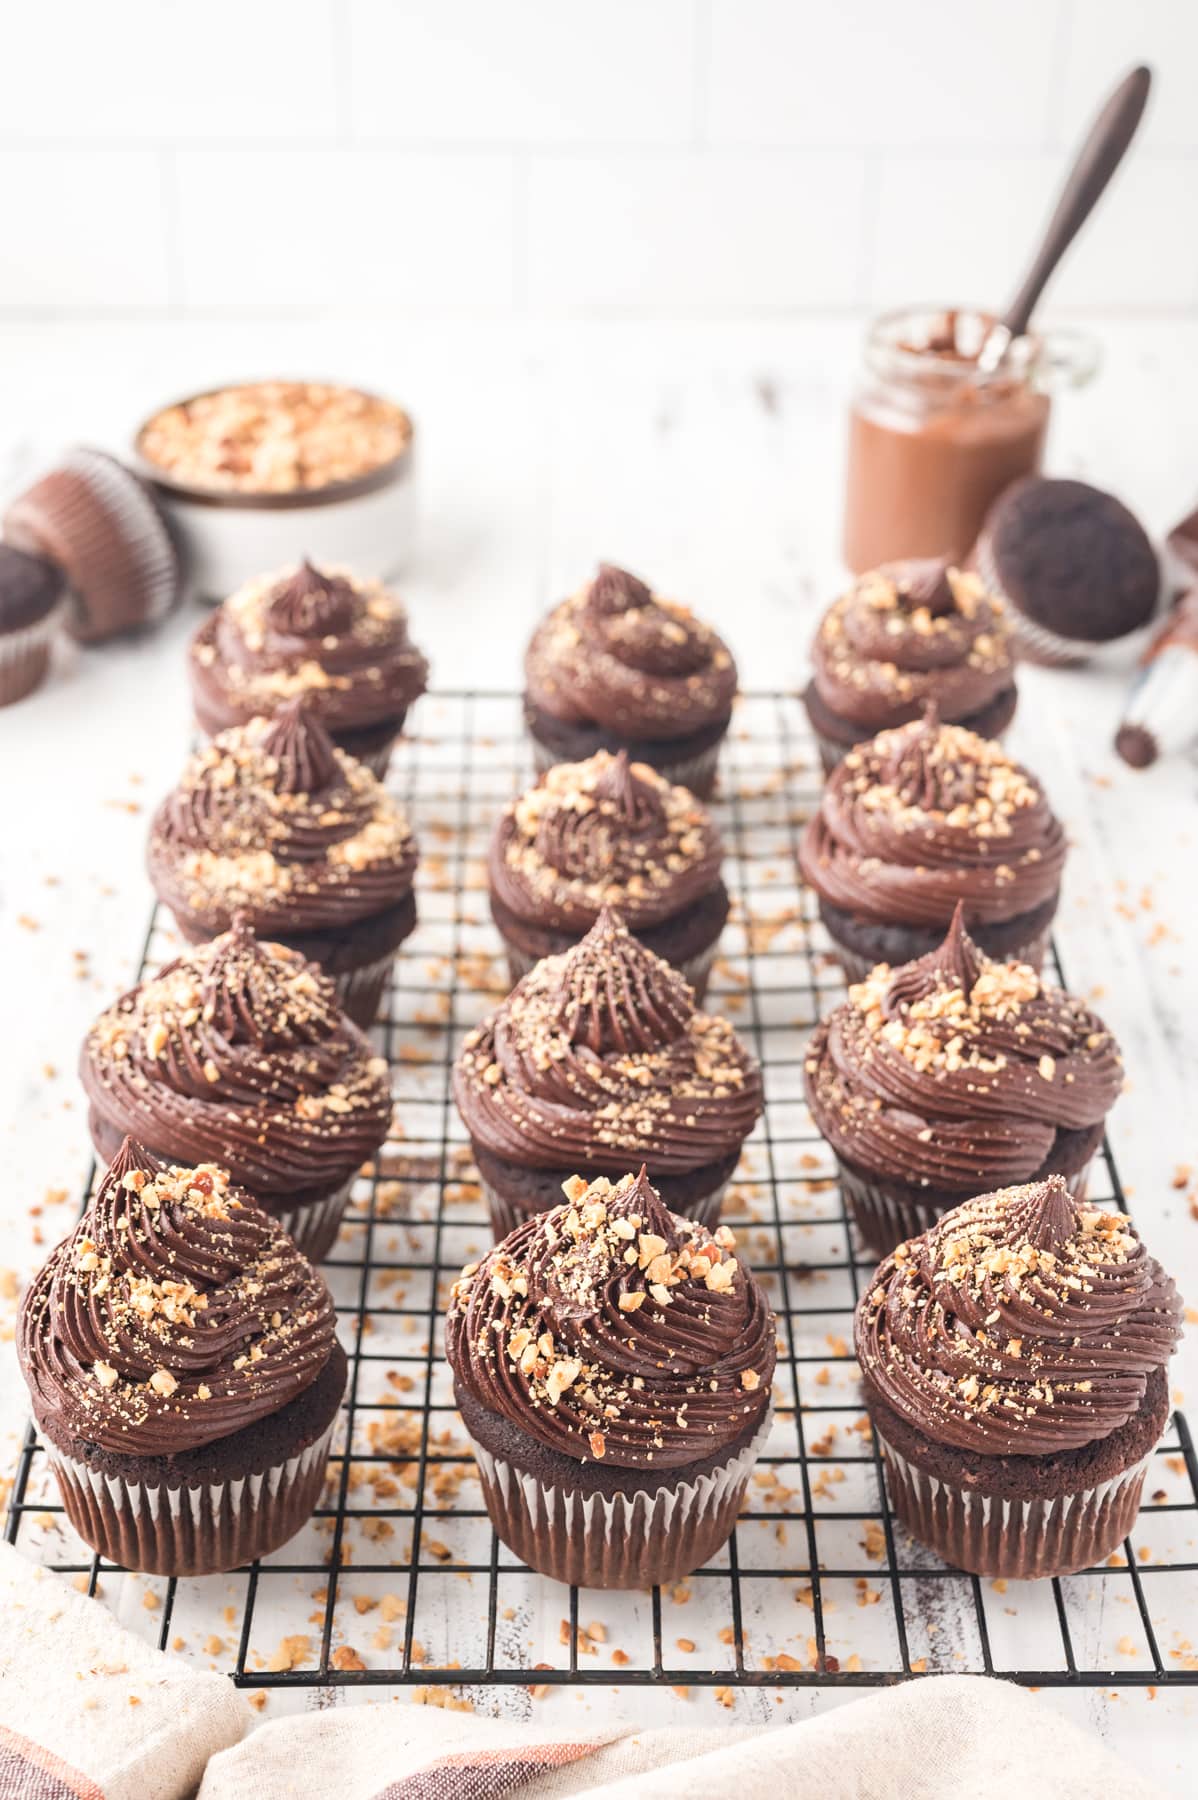 chocolate cupcakes with chocolate frosting and chopped nuts on top on wire rack